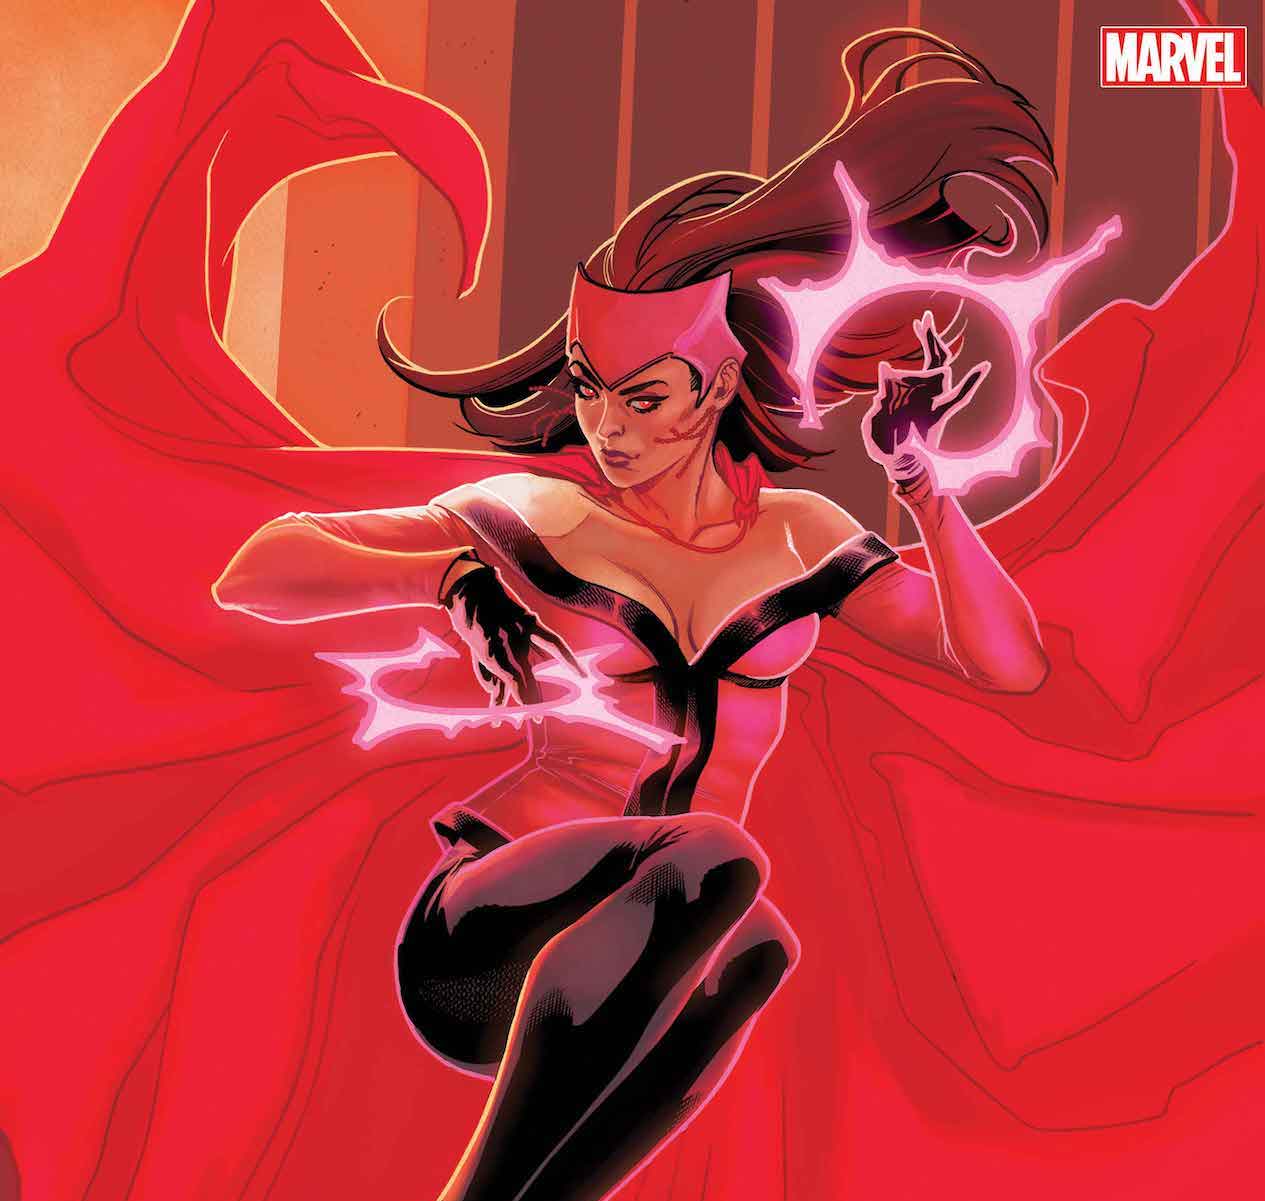 Marvel celebrates the women of Marvel with 13 Elena Casagrande covers all year long